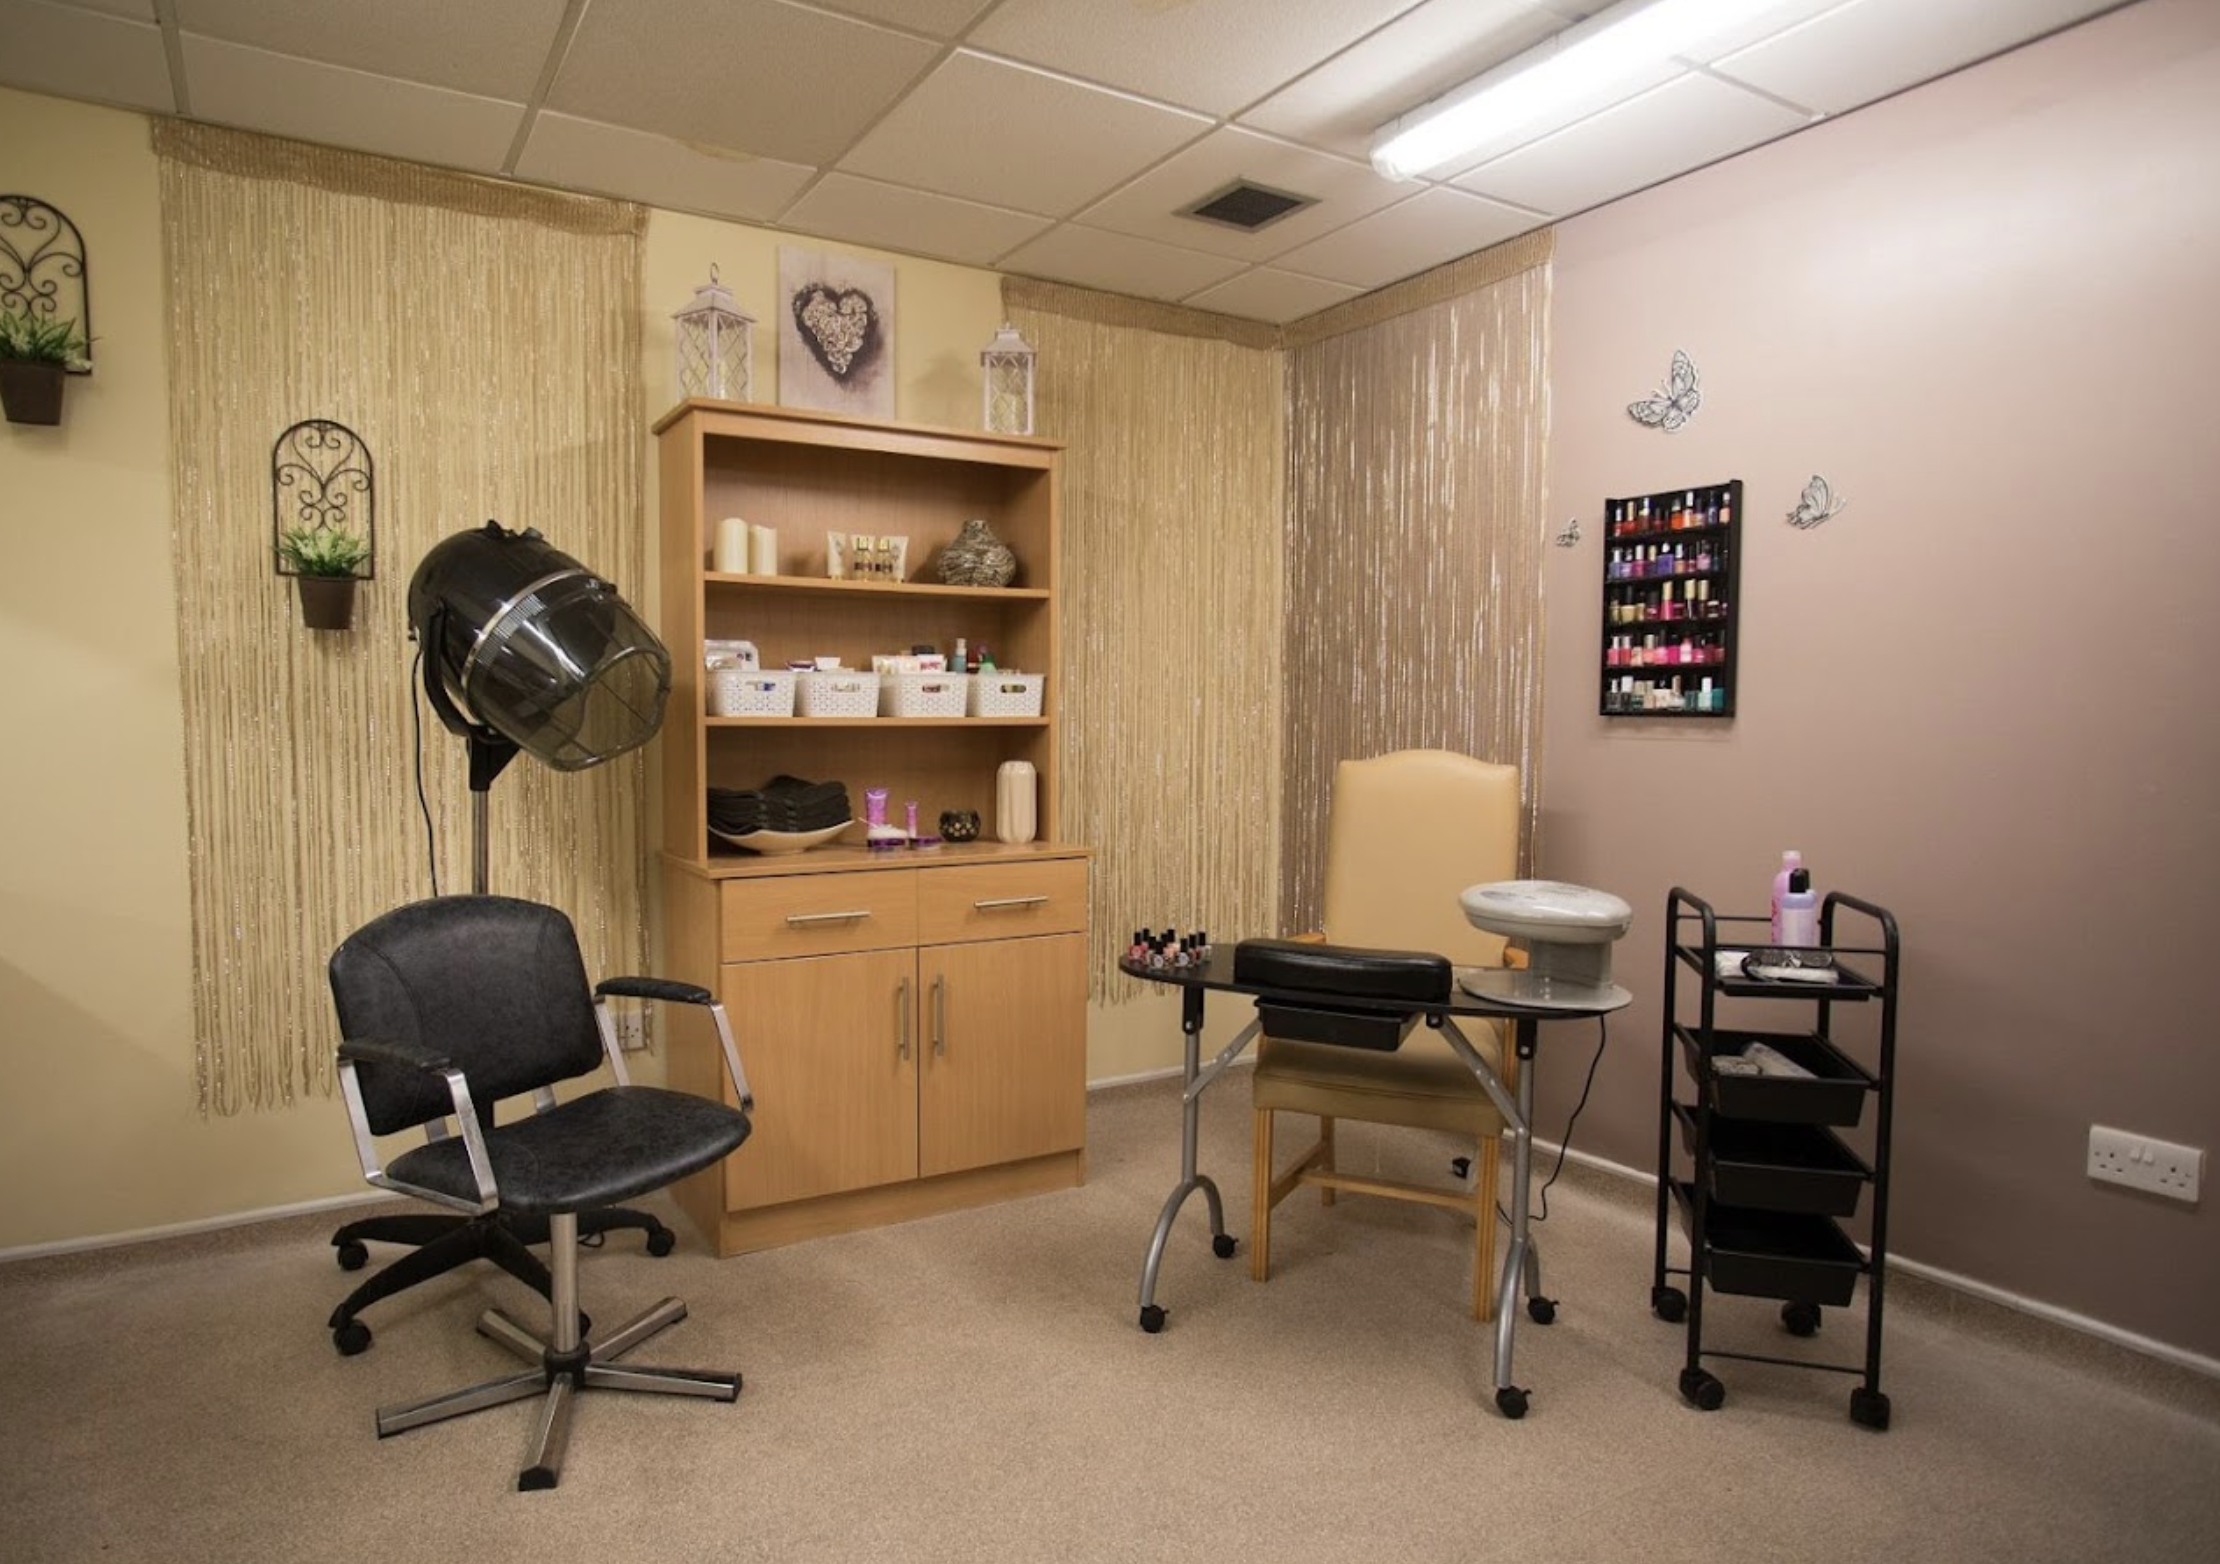 Salon of Ardenlea Grove care home in Solihull, West Midlands